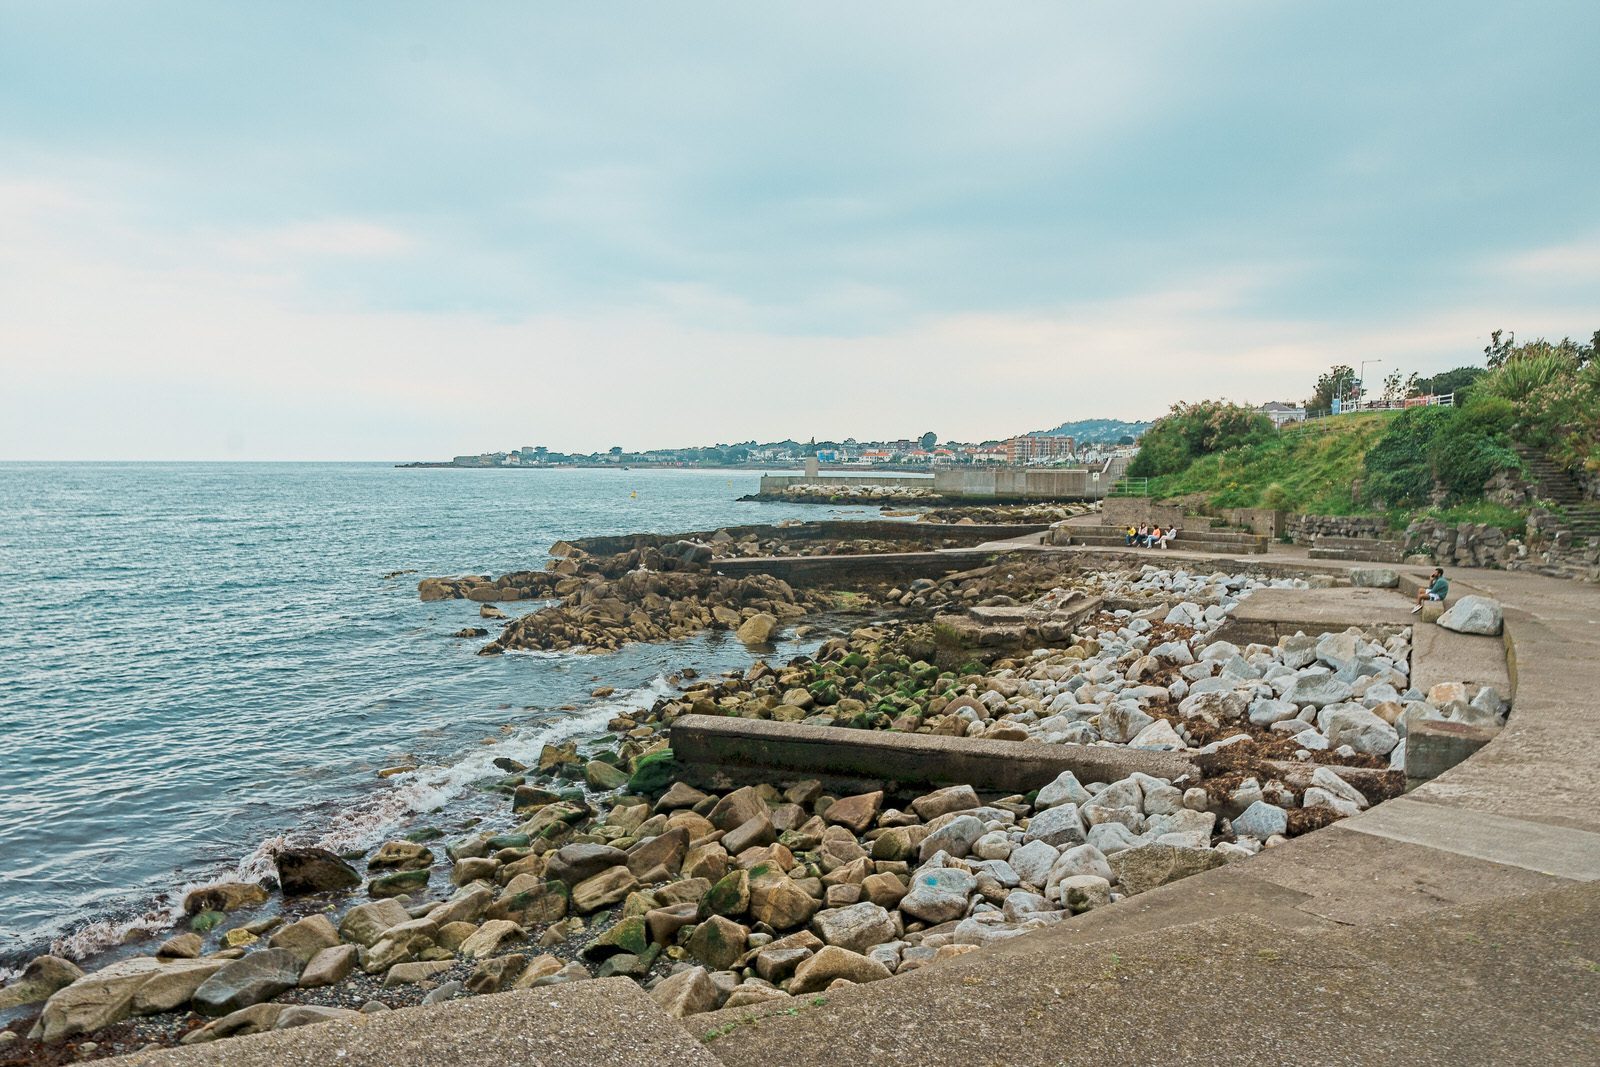 BETWEEN DUN LAOGHAIRE EAST PIER AND THE BATHS [THIS AREA HAS BEEN BADLY NEGLECTED] 007